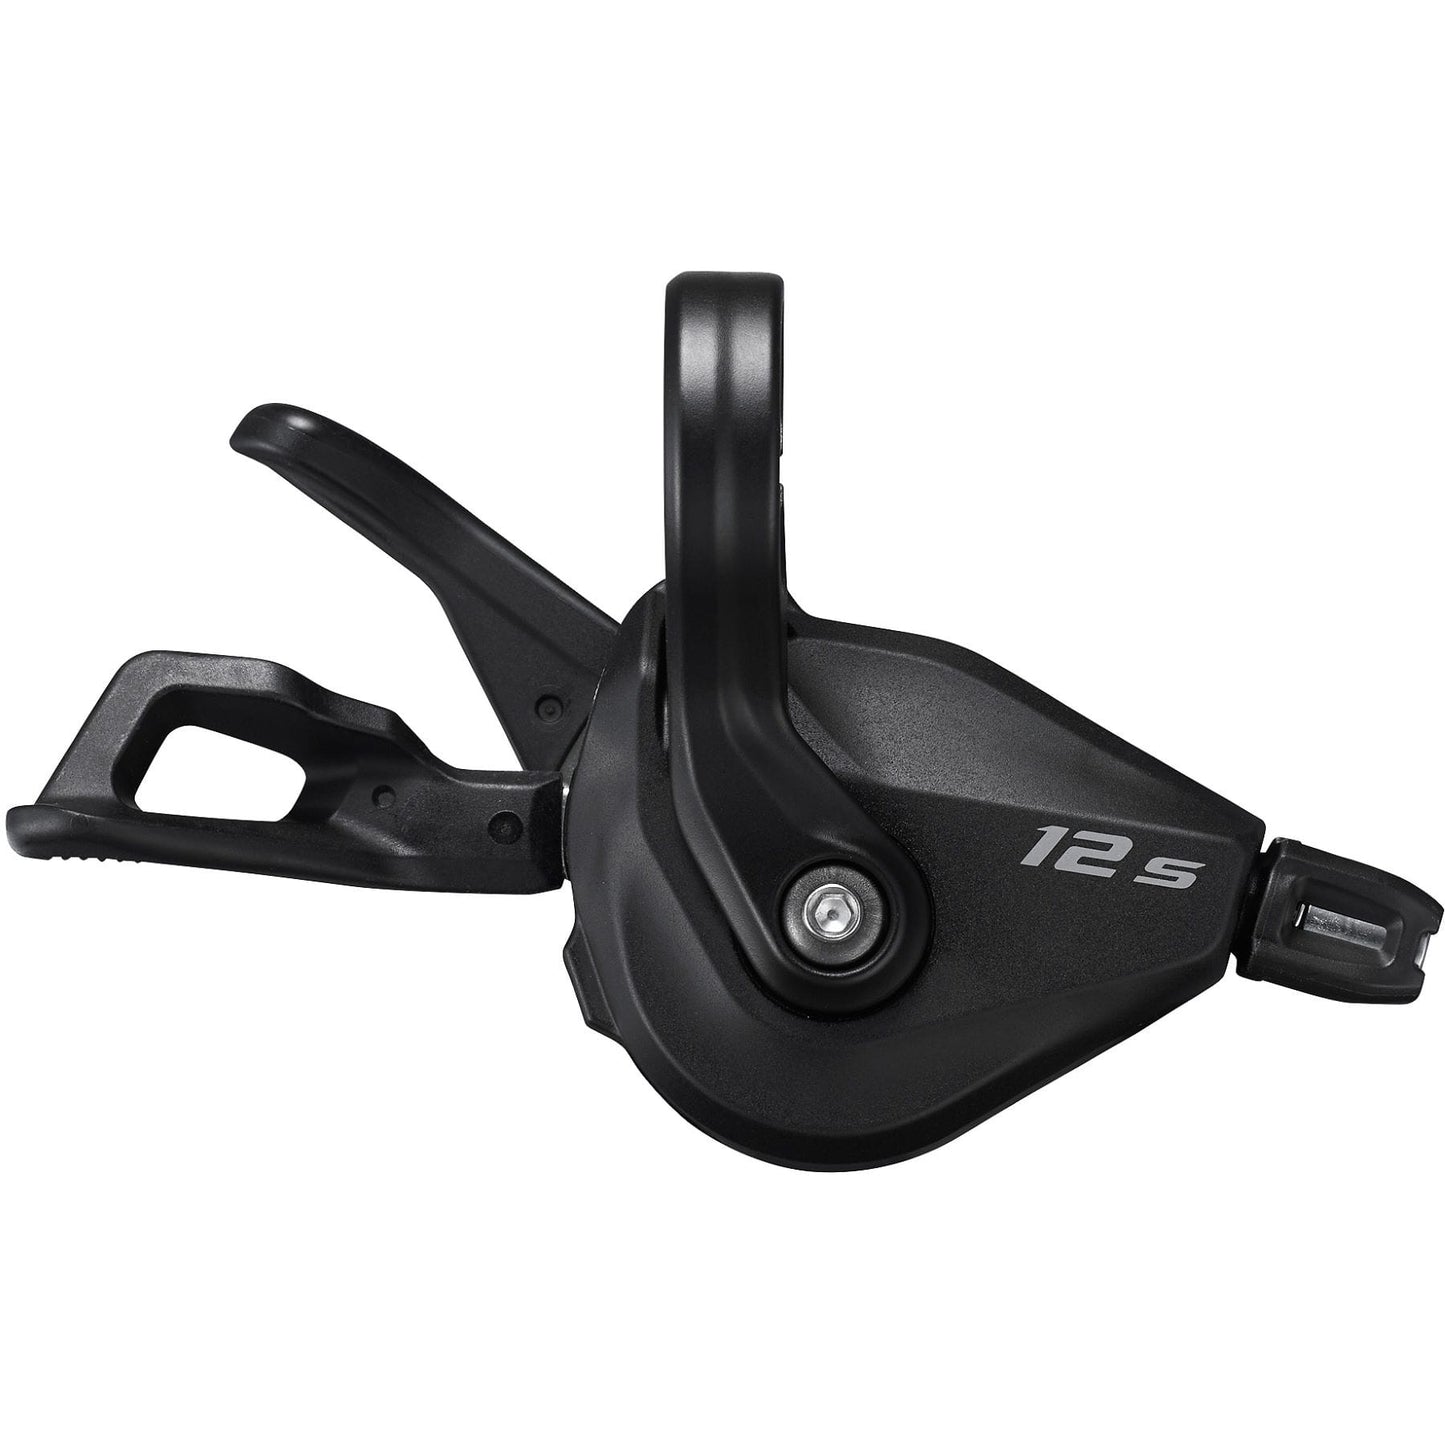 SHIMANO DEORE SL-M6100 12-SPEED SHIFT LEVER - RIGHT HAND